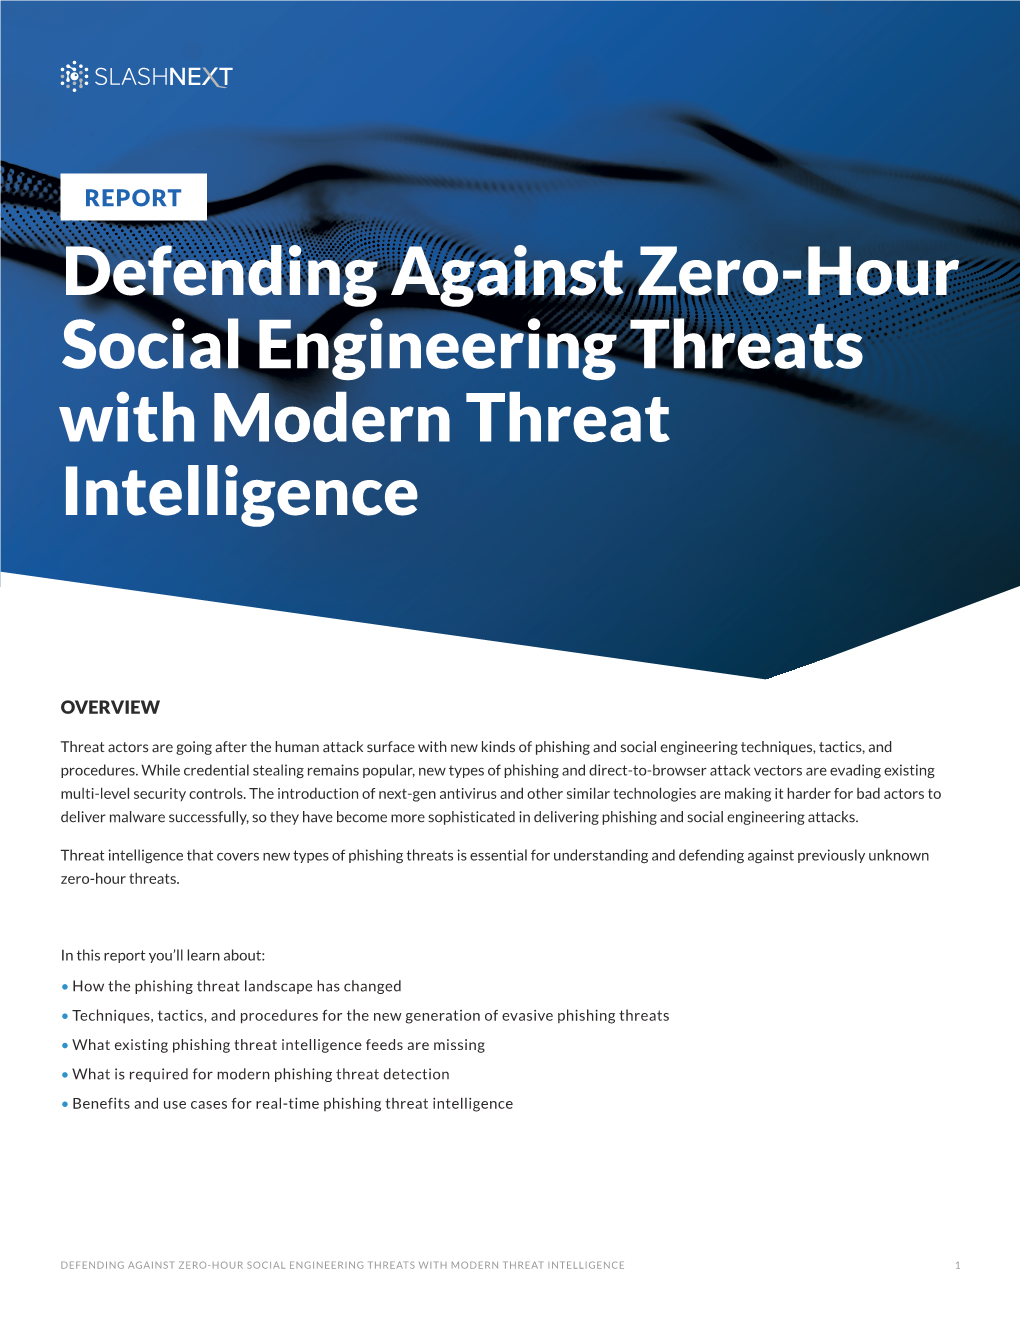 Defending Against Zero-Hour Social Engineering Threats with Modern Threat Intelligence